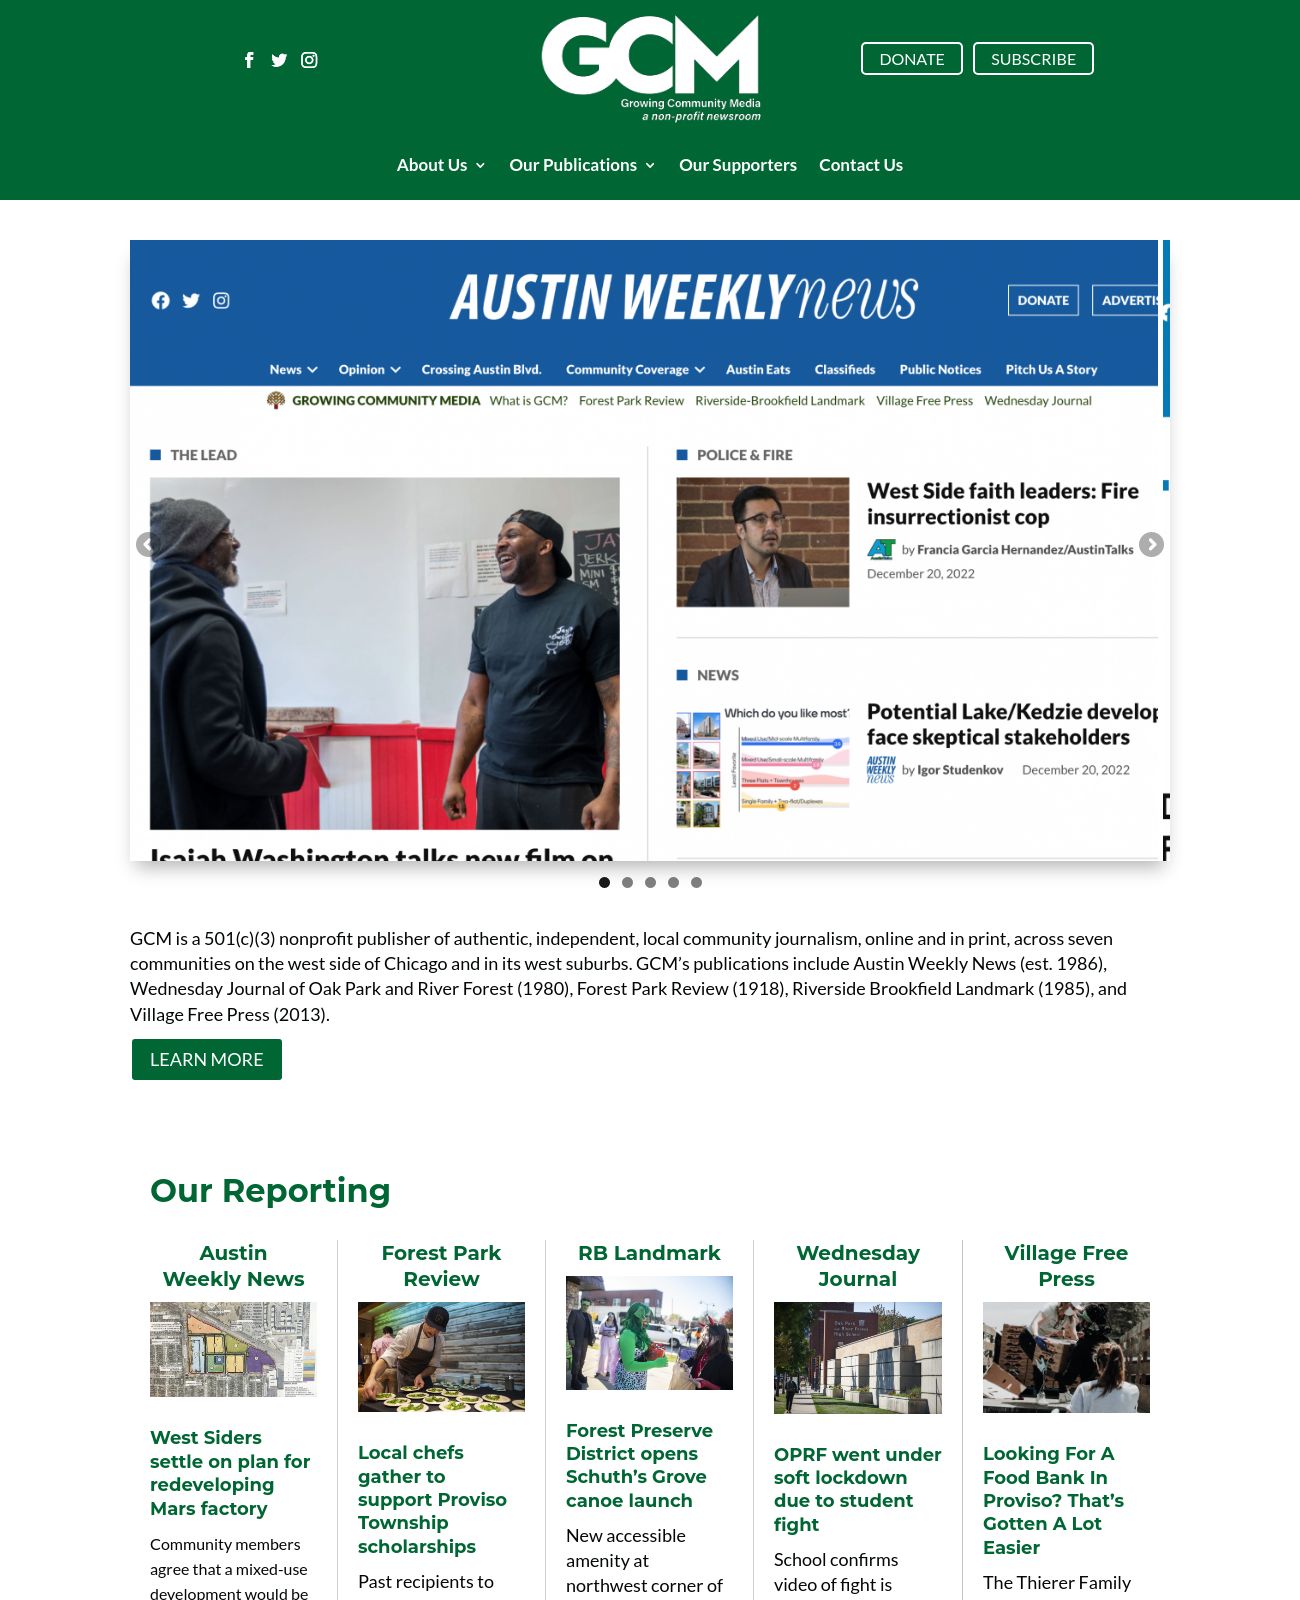 Austin Weekly News at 2023-01-21 16:51:33-06:00 local time